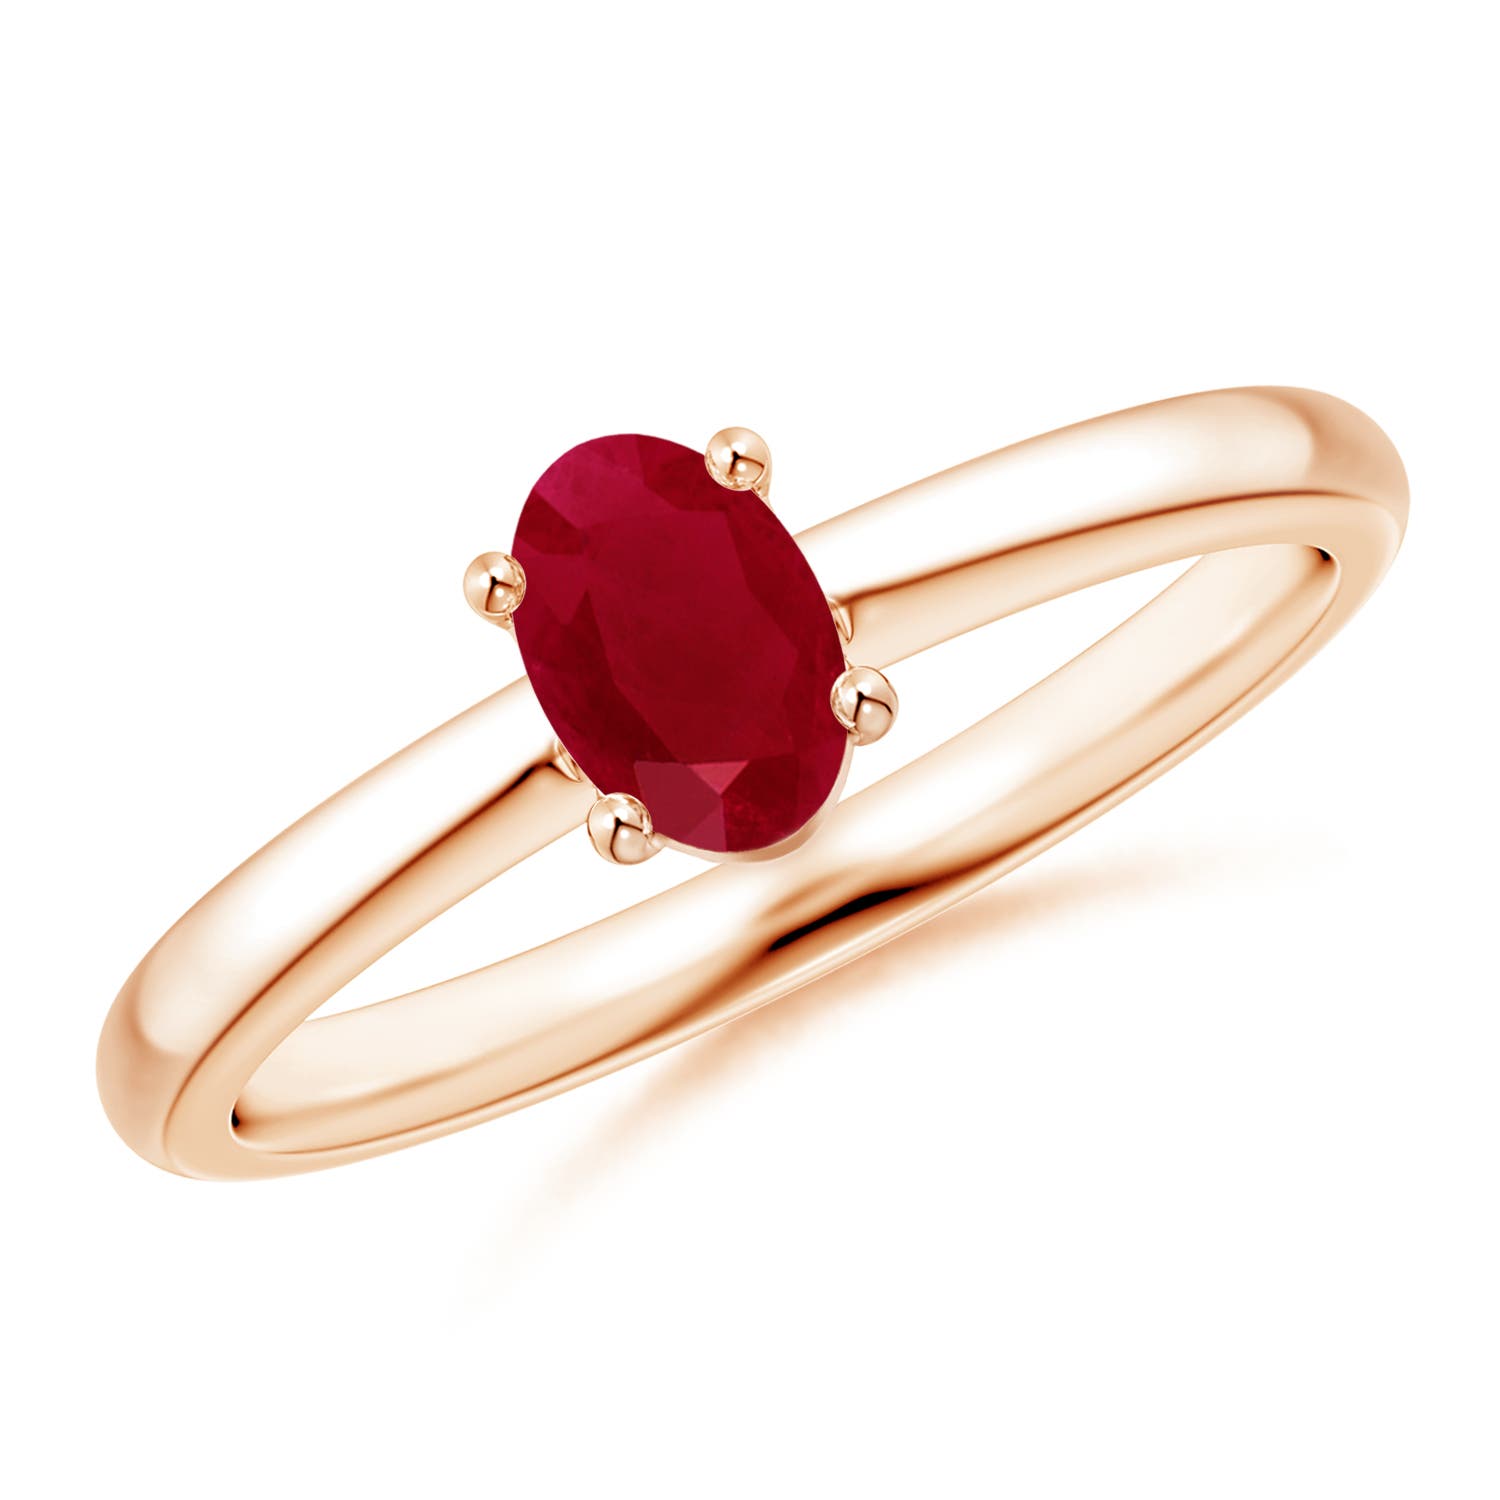 AA - Ruby / 0.6 CT / 14 KT Rose Gold